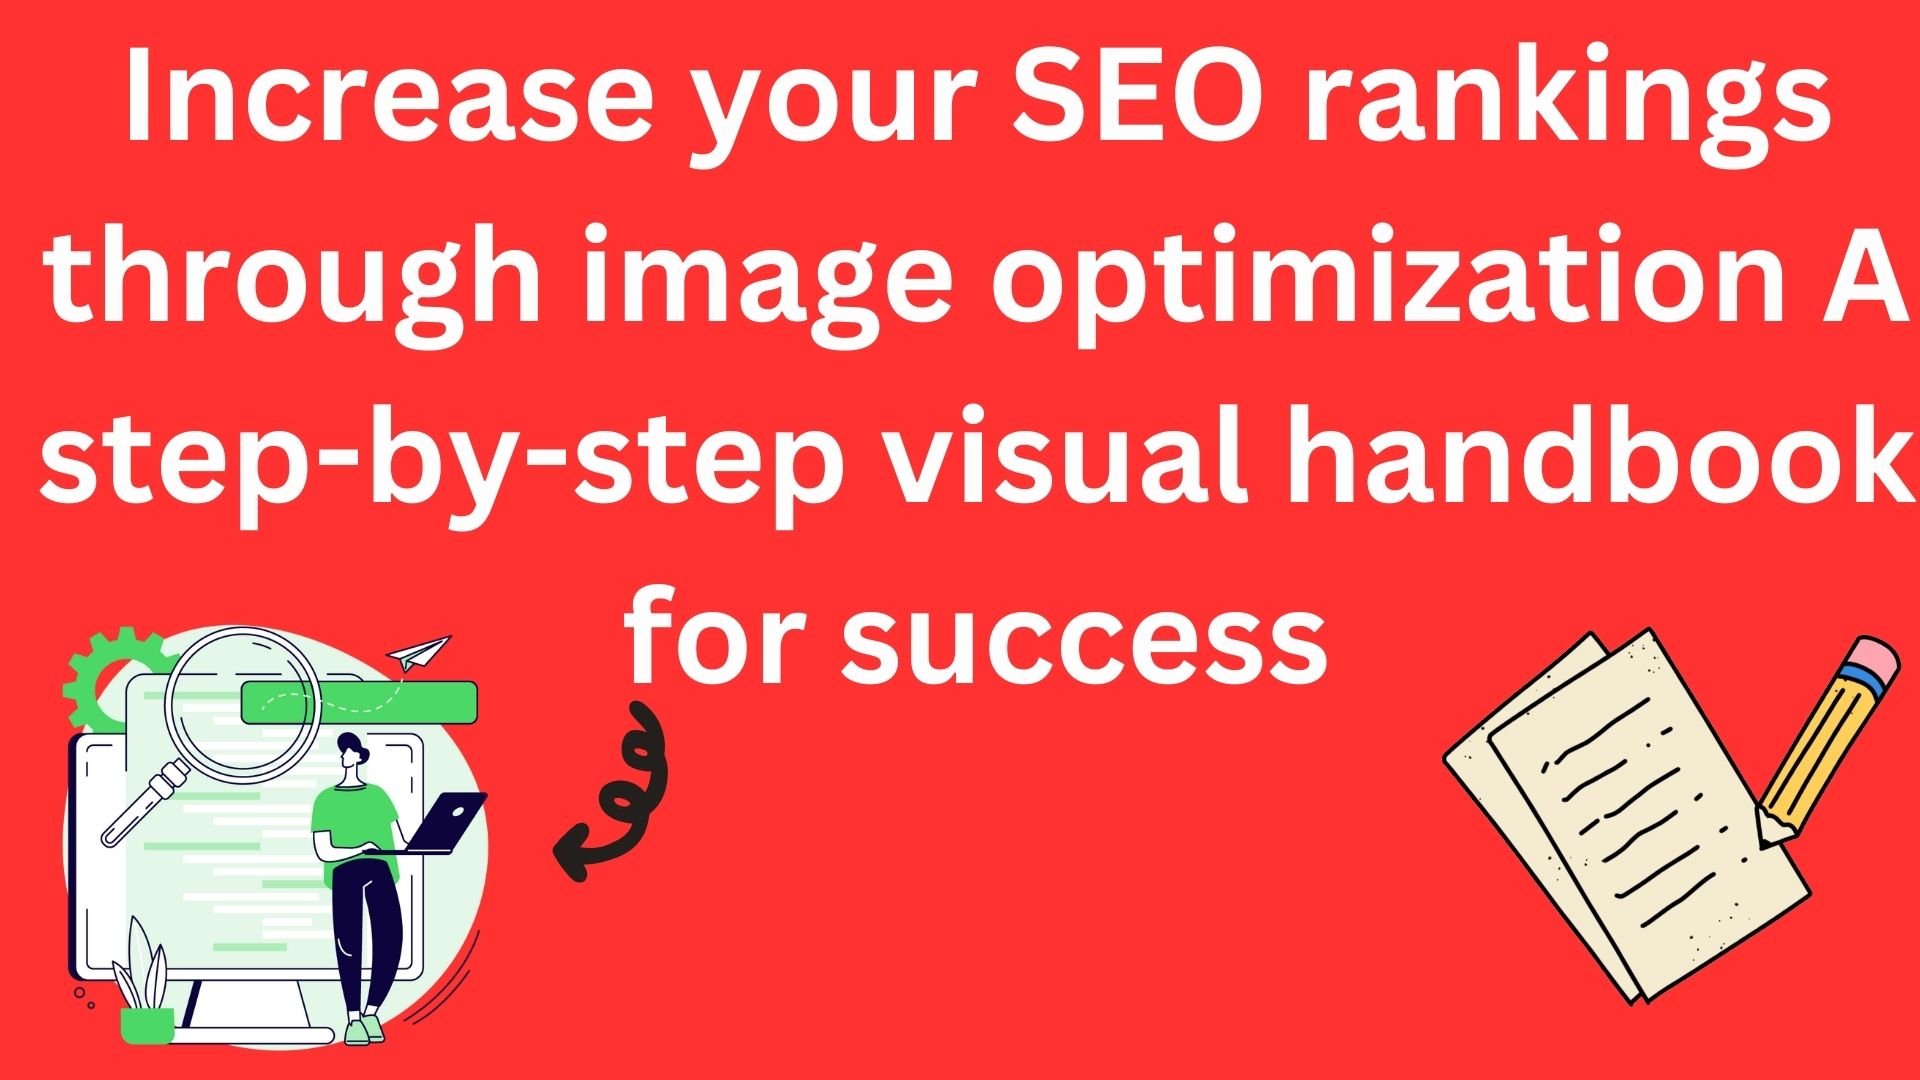 Increase Your Seo Rankings Through Image Optimization A Step-By-Step Visual Handbook For Success